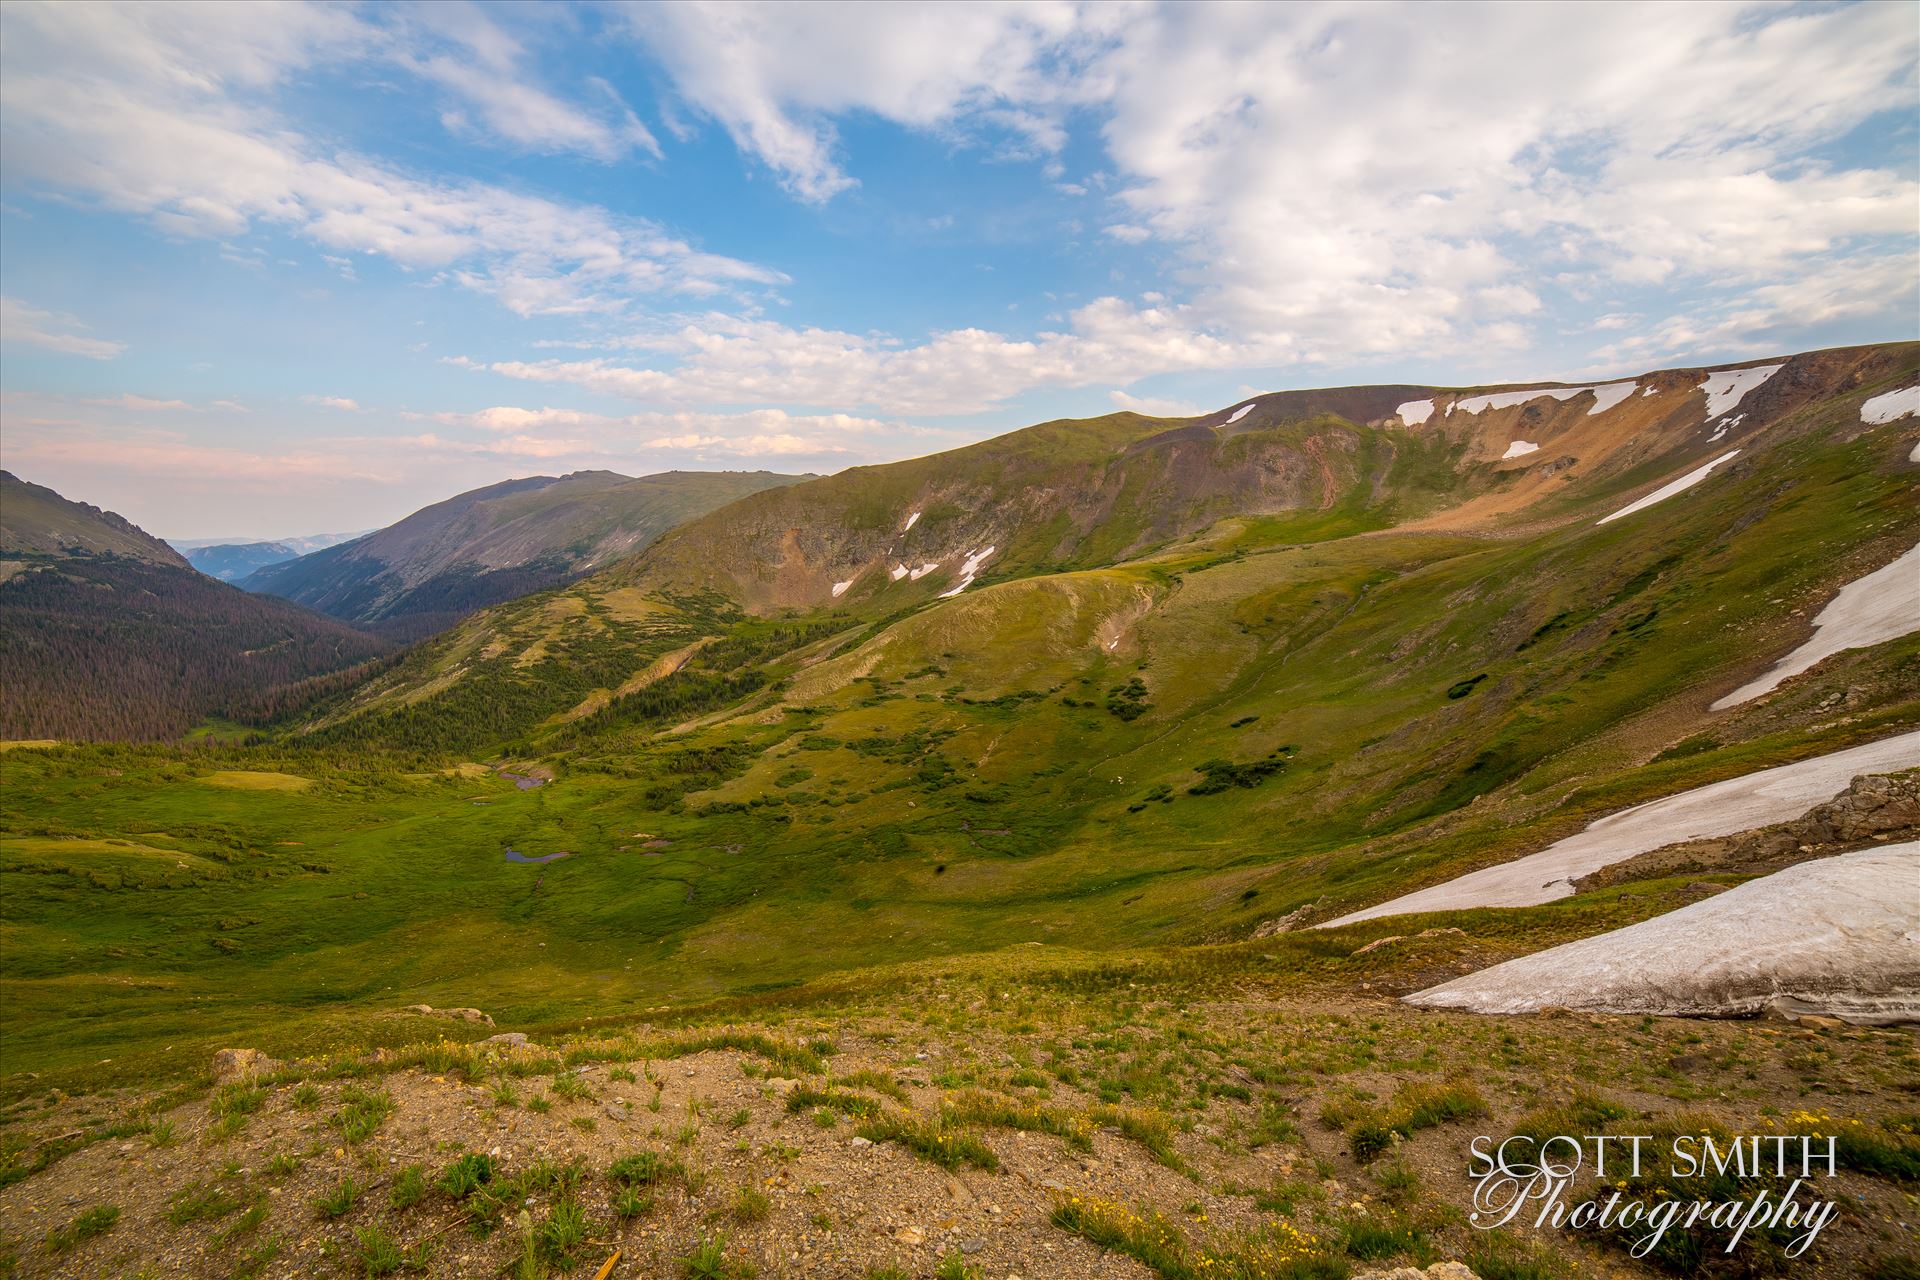 Rocky Mountain National Park Alpine Visitors Center - Near the summit of Trail Ridge Road in Rocky Mountain National Park, the Alpine Visitor's Center offers some astounding views. by Scott Smith Photos